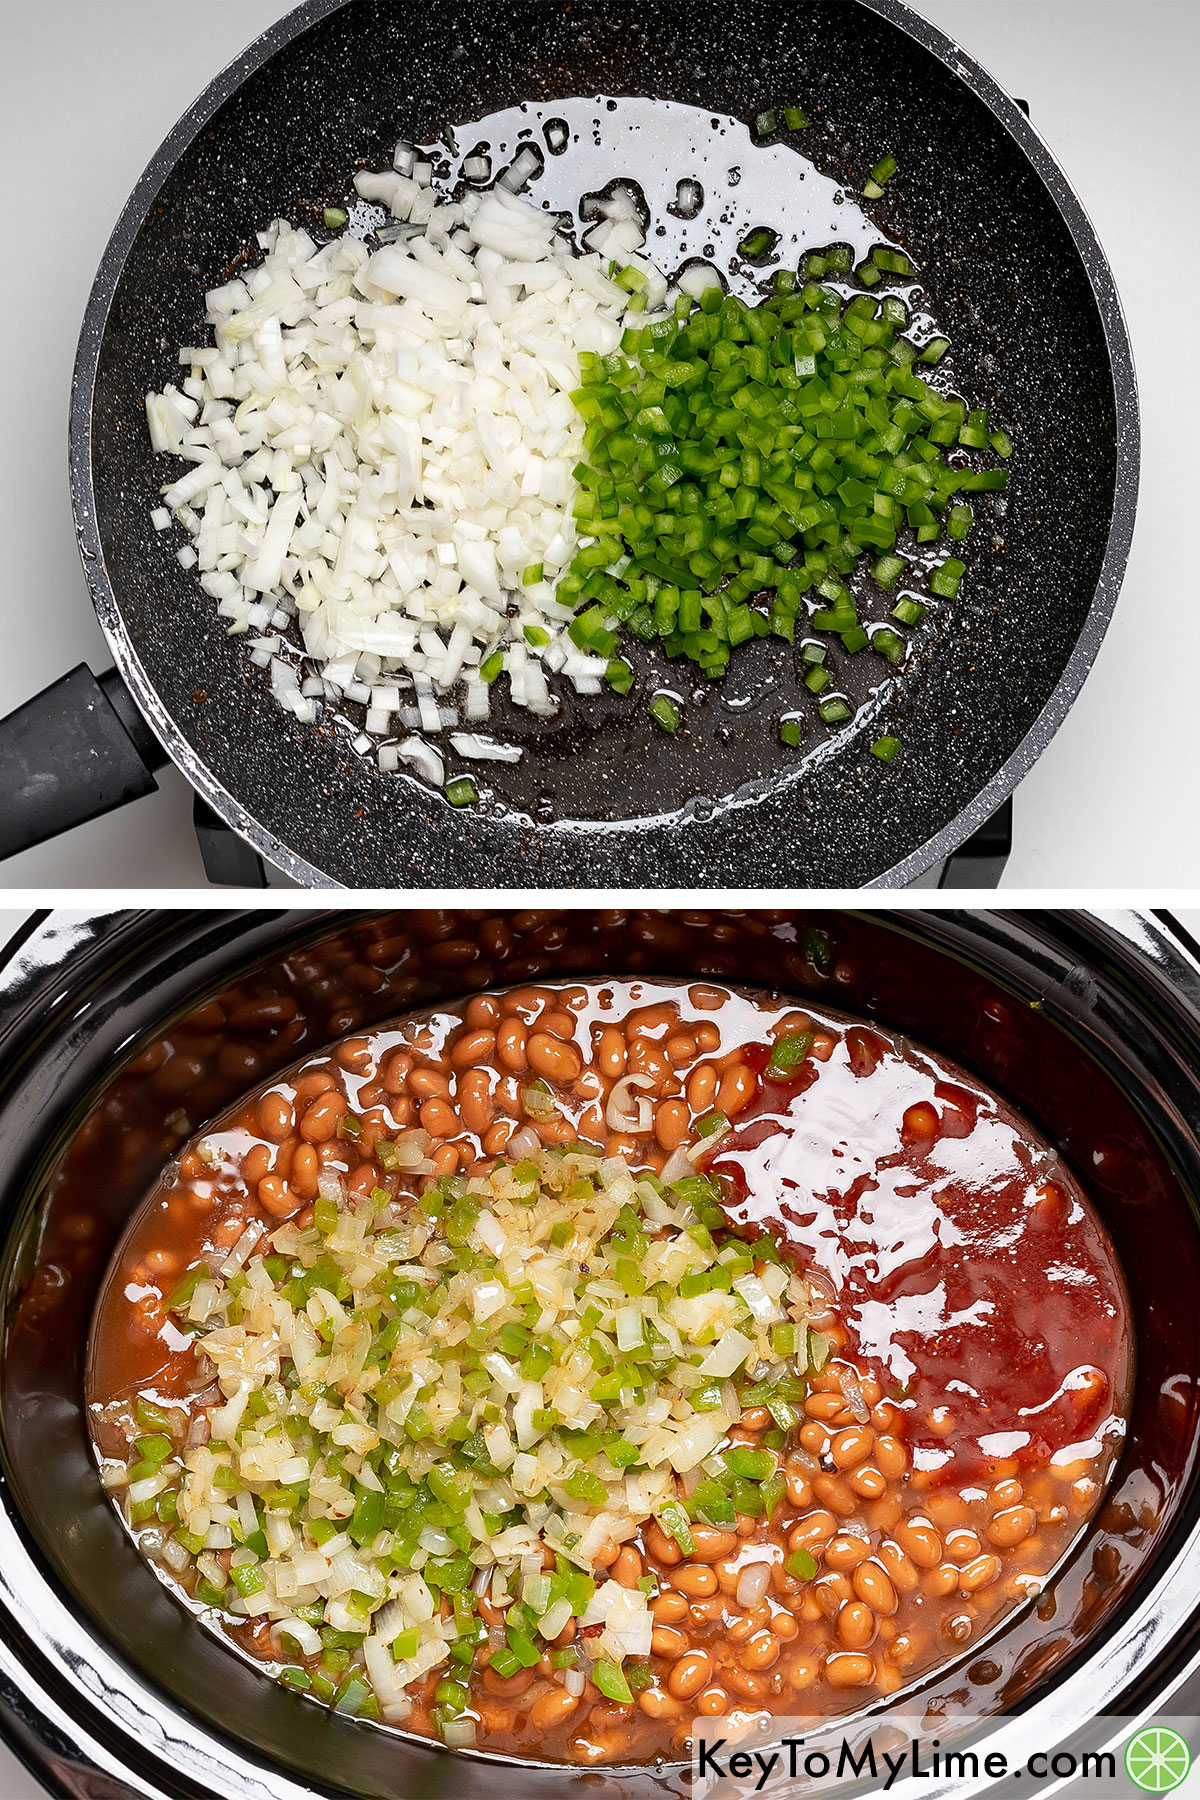 Sauteing the vegetables in a skillet then adding to a crockpot once cooked with beans and the homemade sauce.